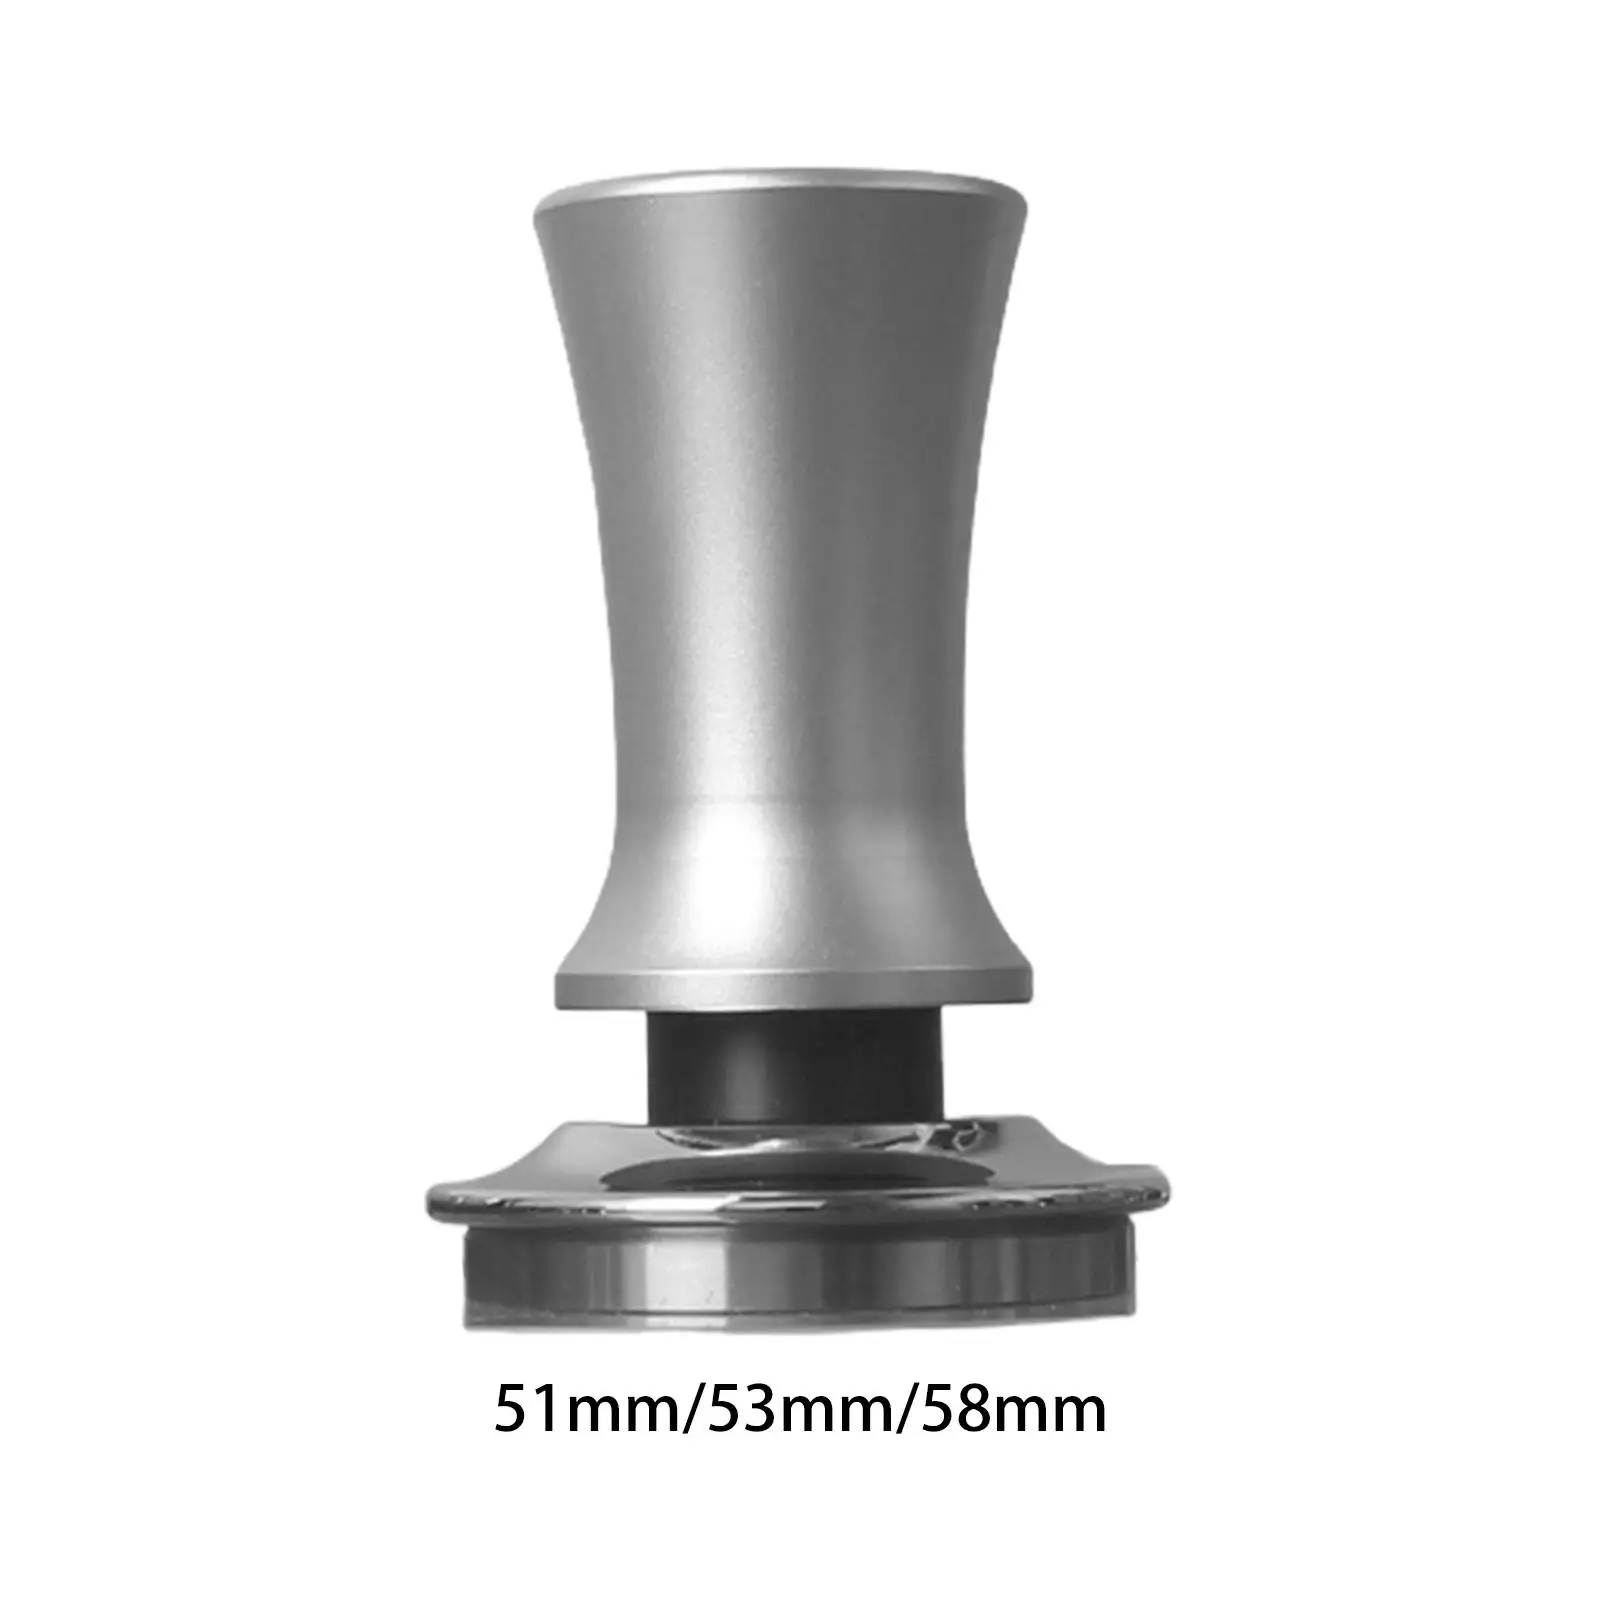 espresso Distributor Bean Press Tool with Spring Loaded Espresso Machine Accessory Hand Tampers Leveler Coffee Tamper